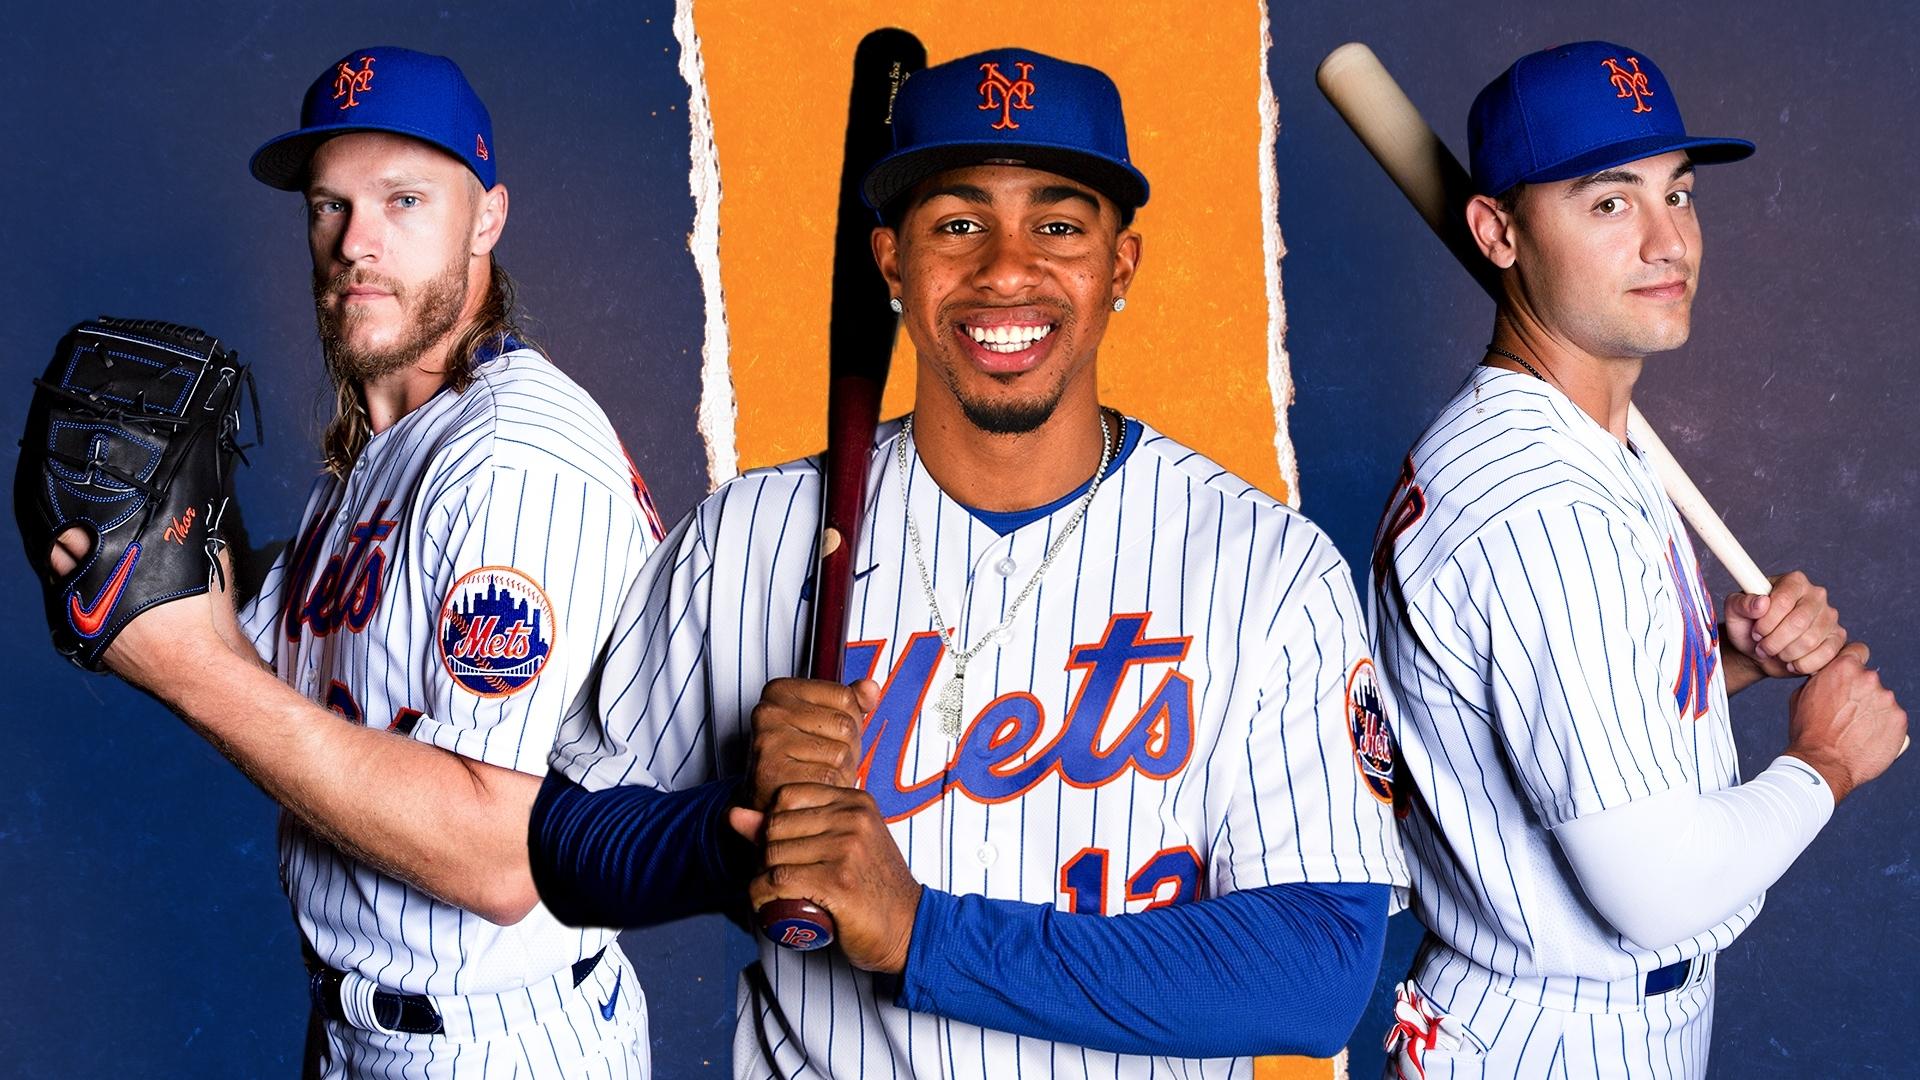 Noah Syndergaard, Francisco Lindor, and Michael Conforto / SNY treated image